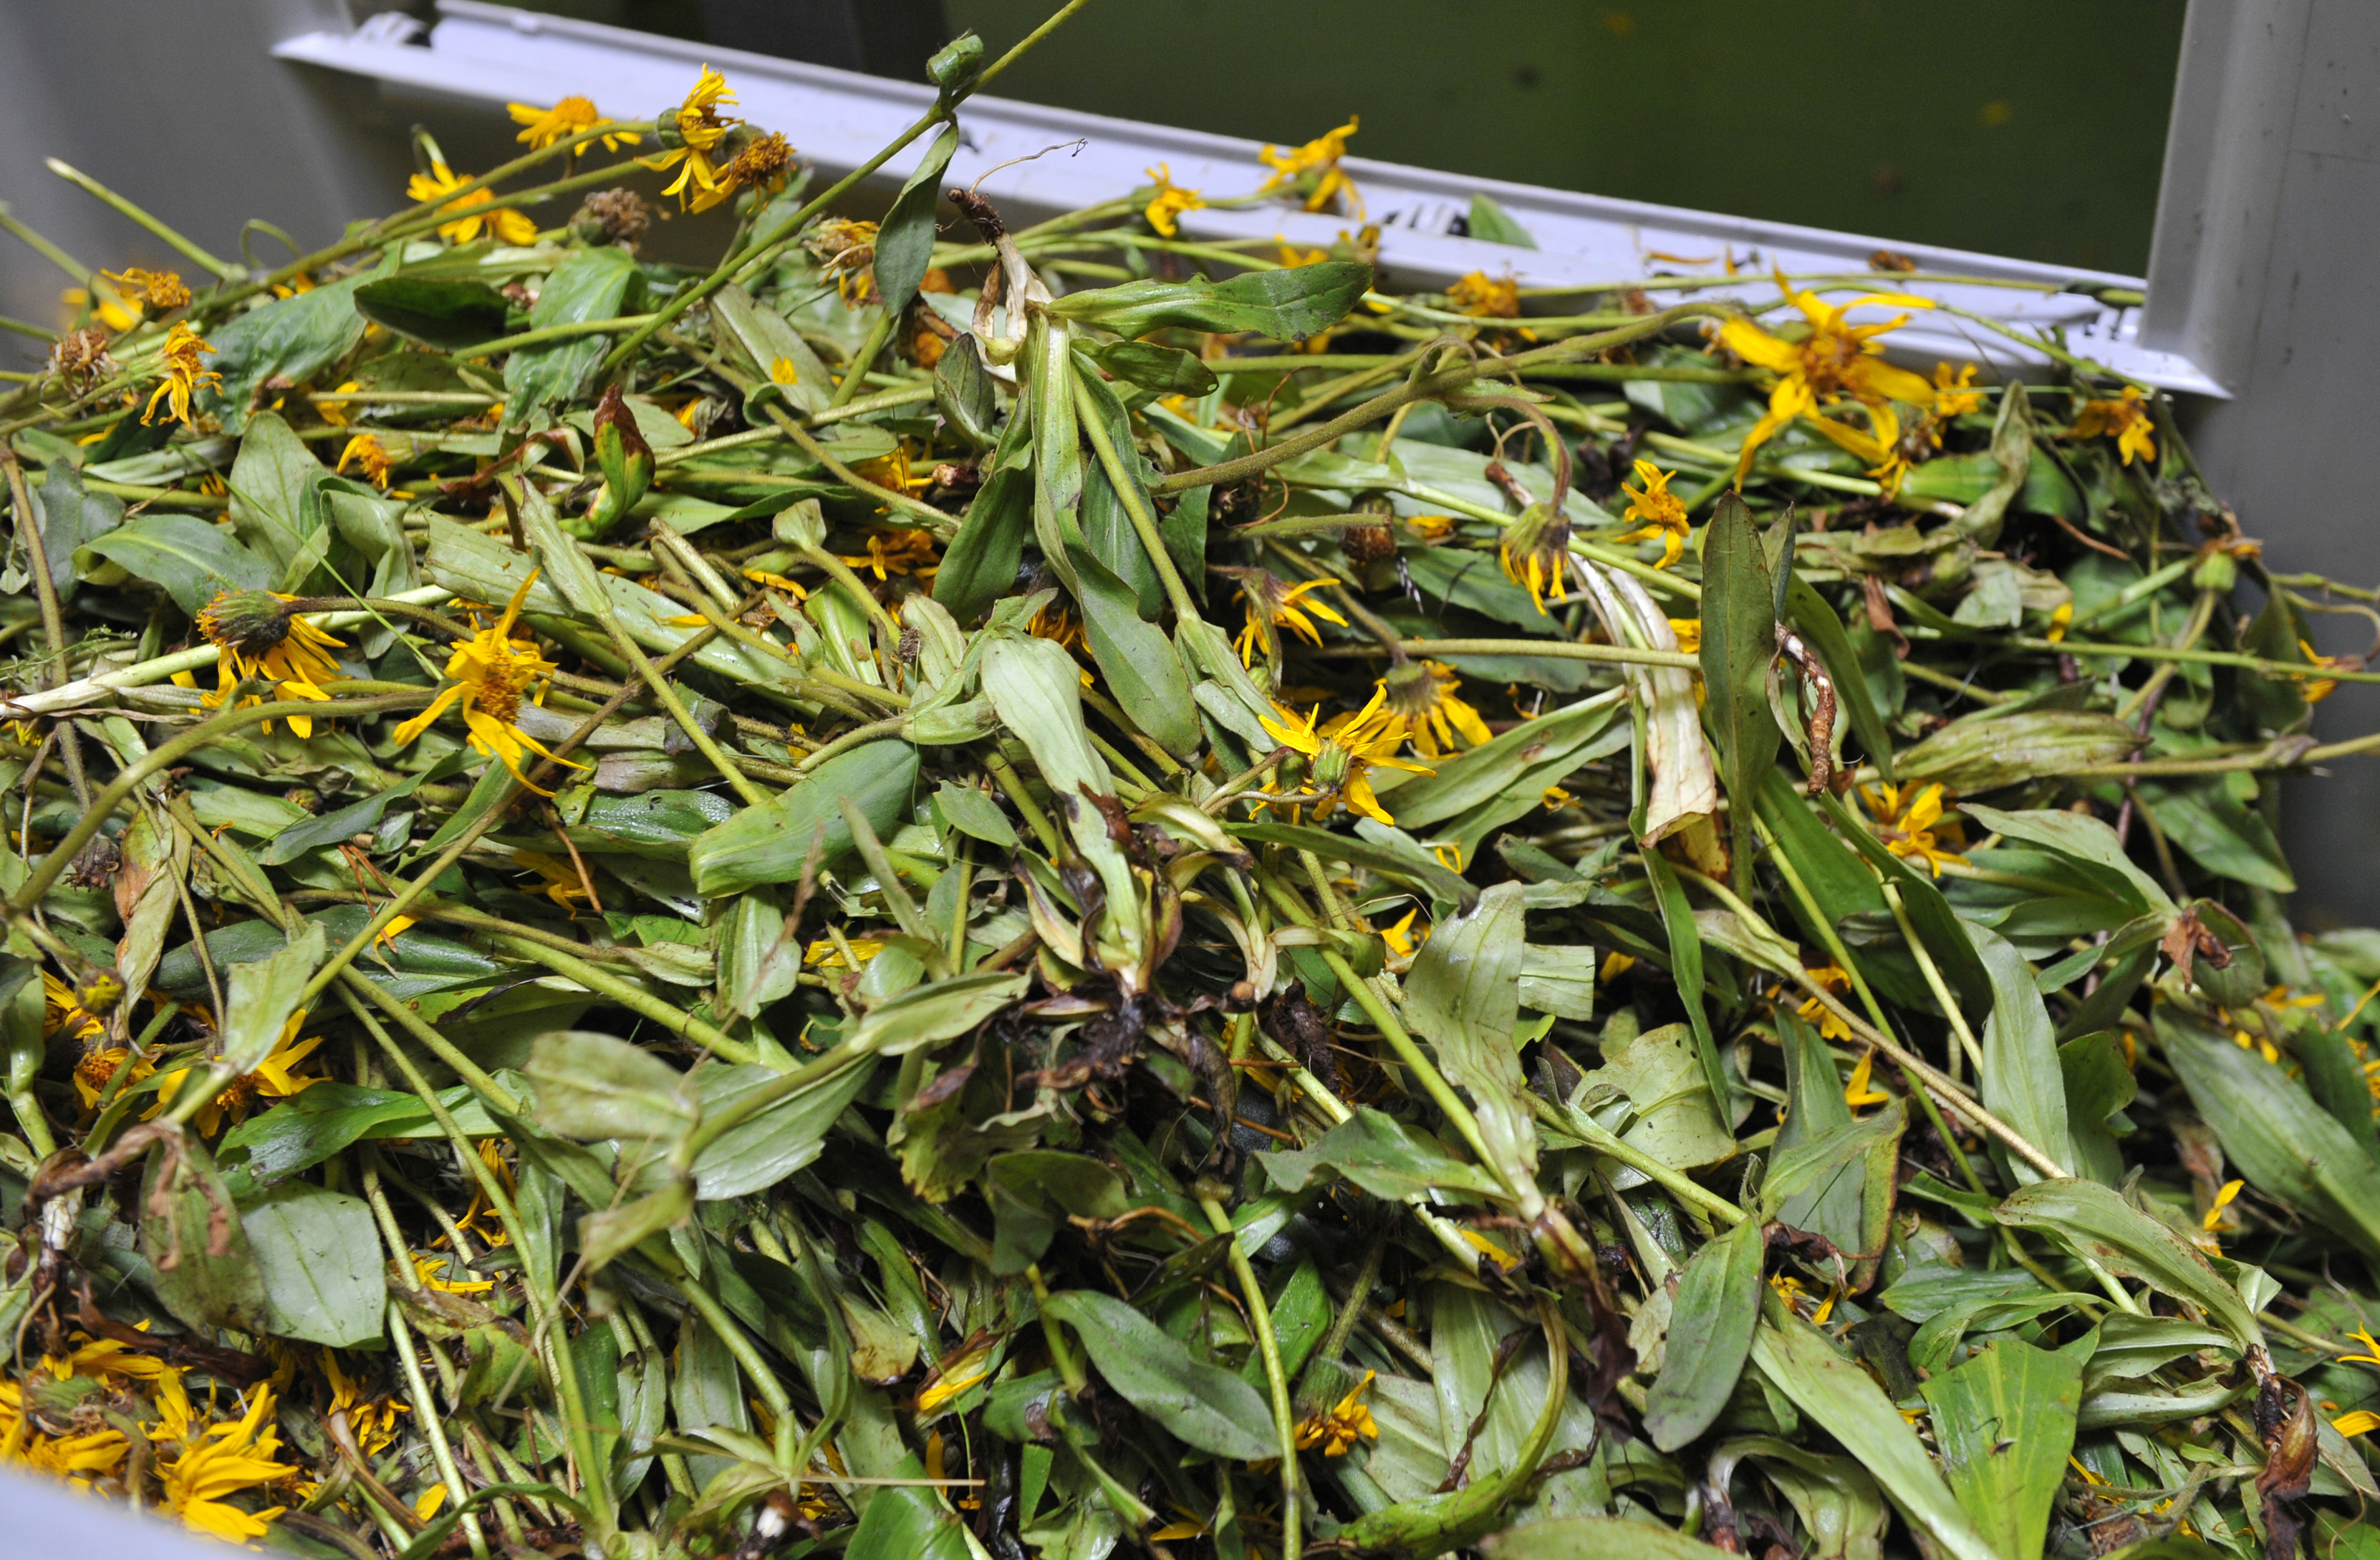 Arnica montana plants before being crushed for homeopathic medicine at a French factory in July 2015 (AFP)